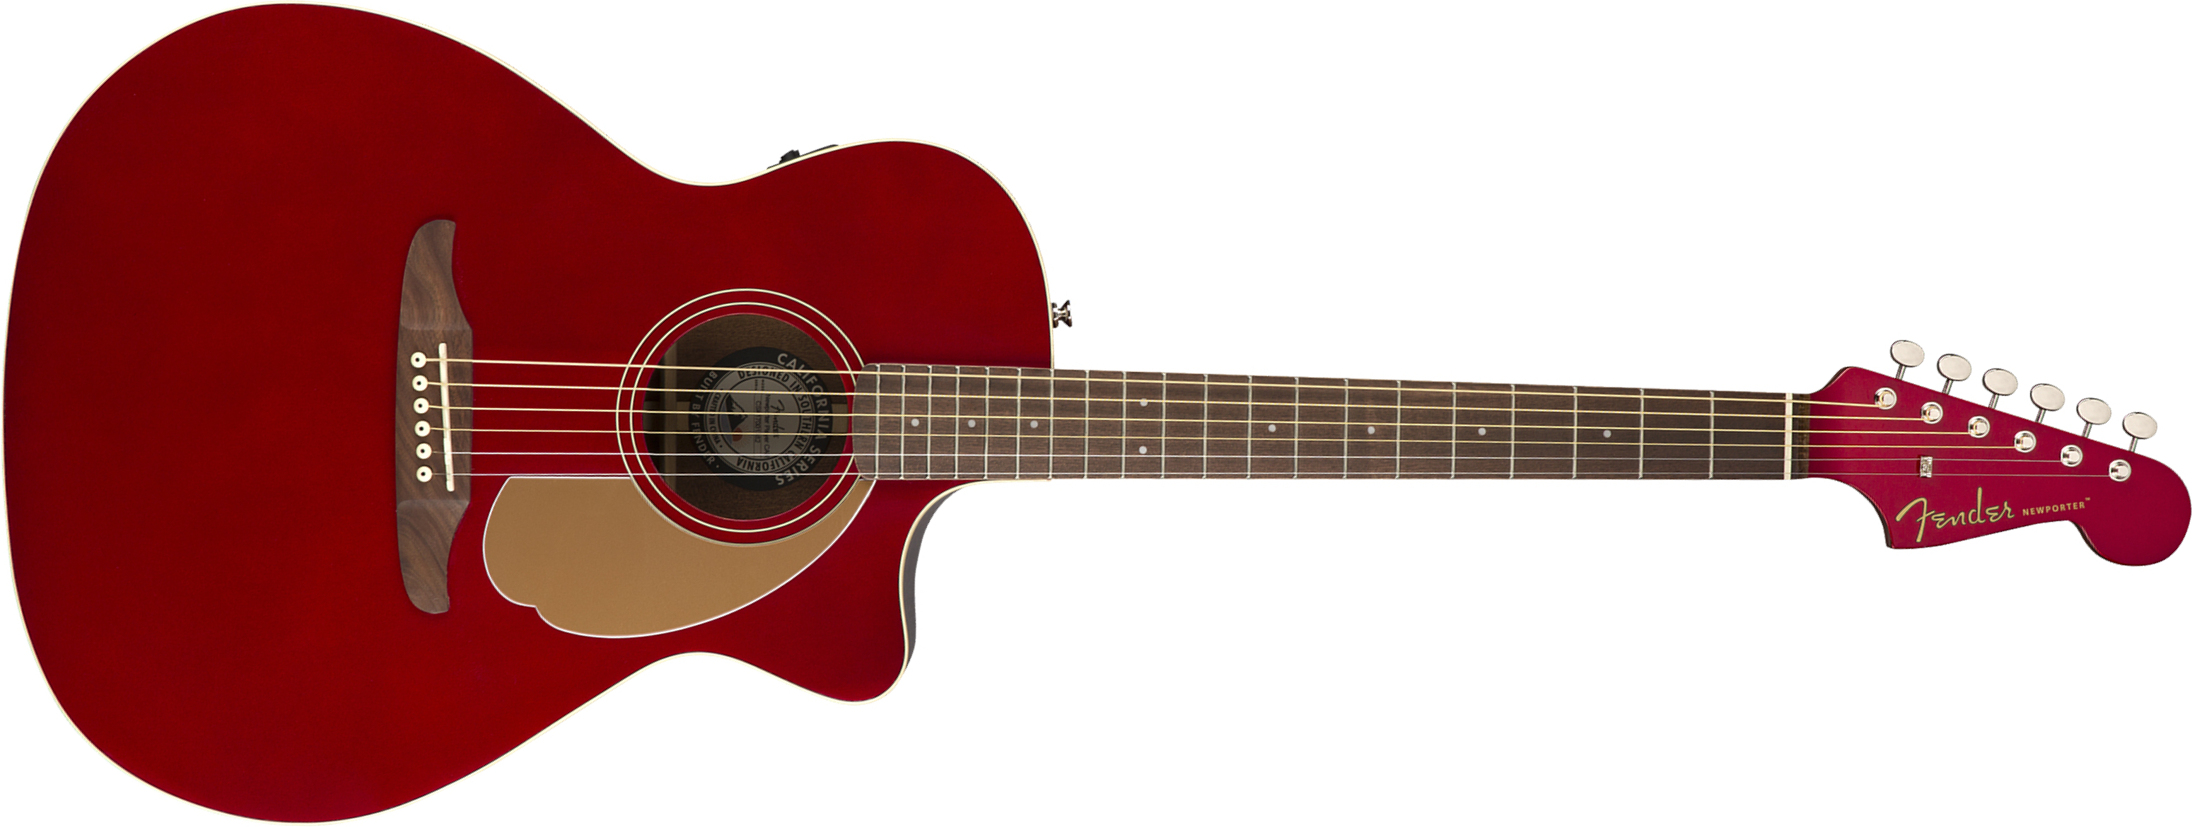 Fender Newporter Player Auditorium Cw Epicea Acajou Wal - Candy Apple Red - Guitarra electro acustica - Main picture